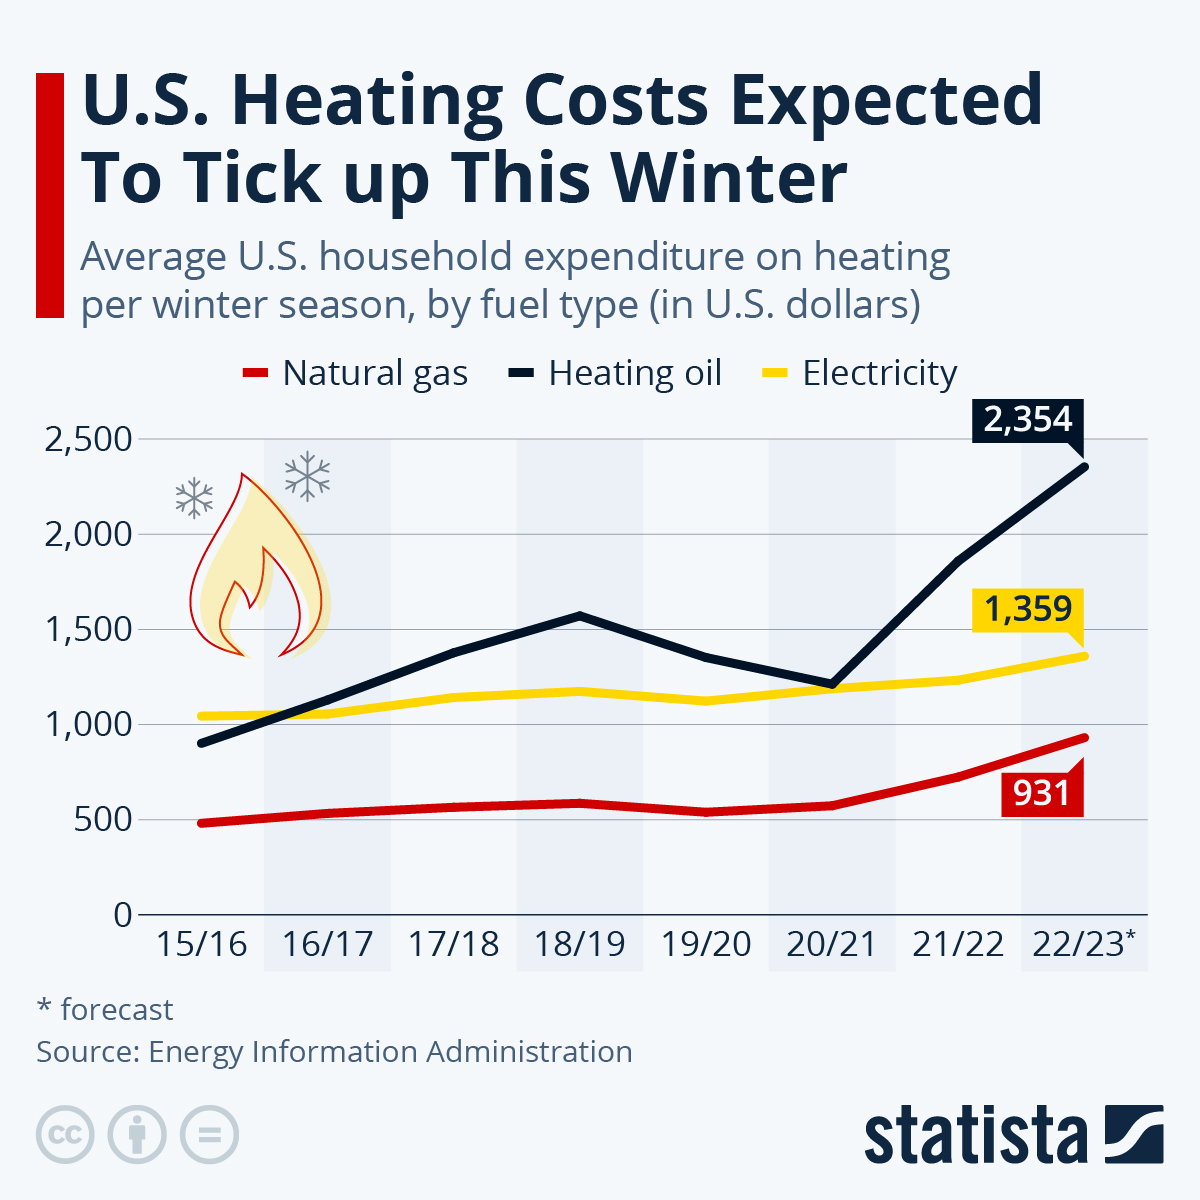 U.S. Heating Costs Expected To Tick up This Winter